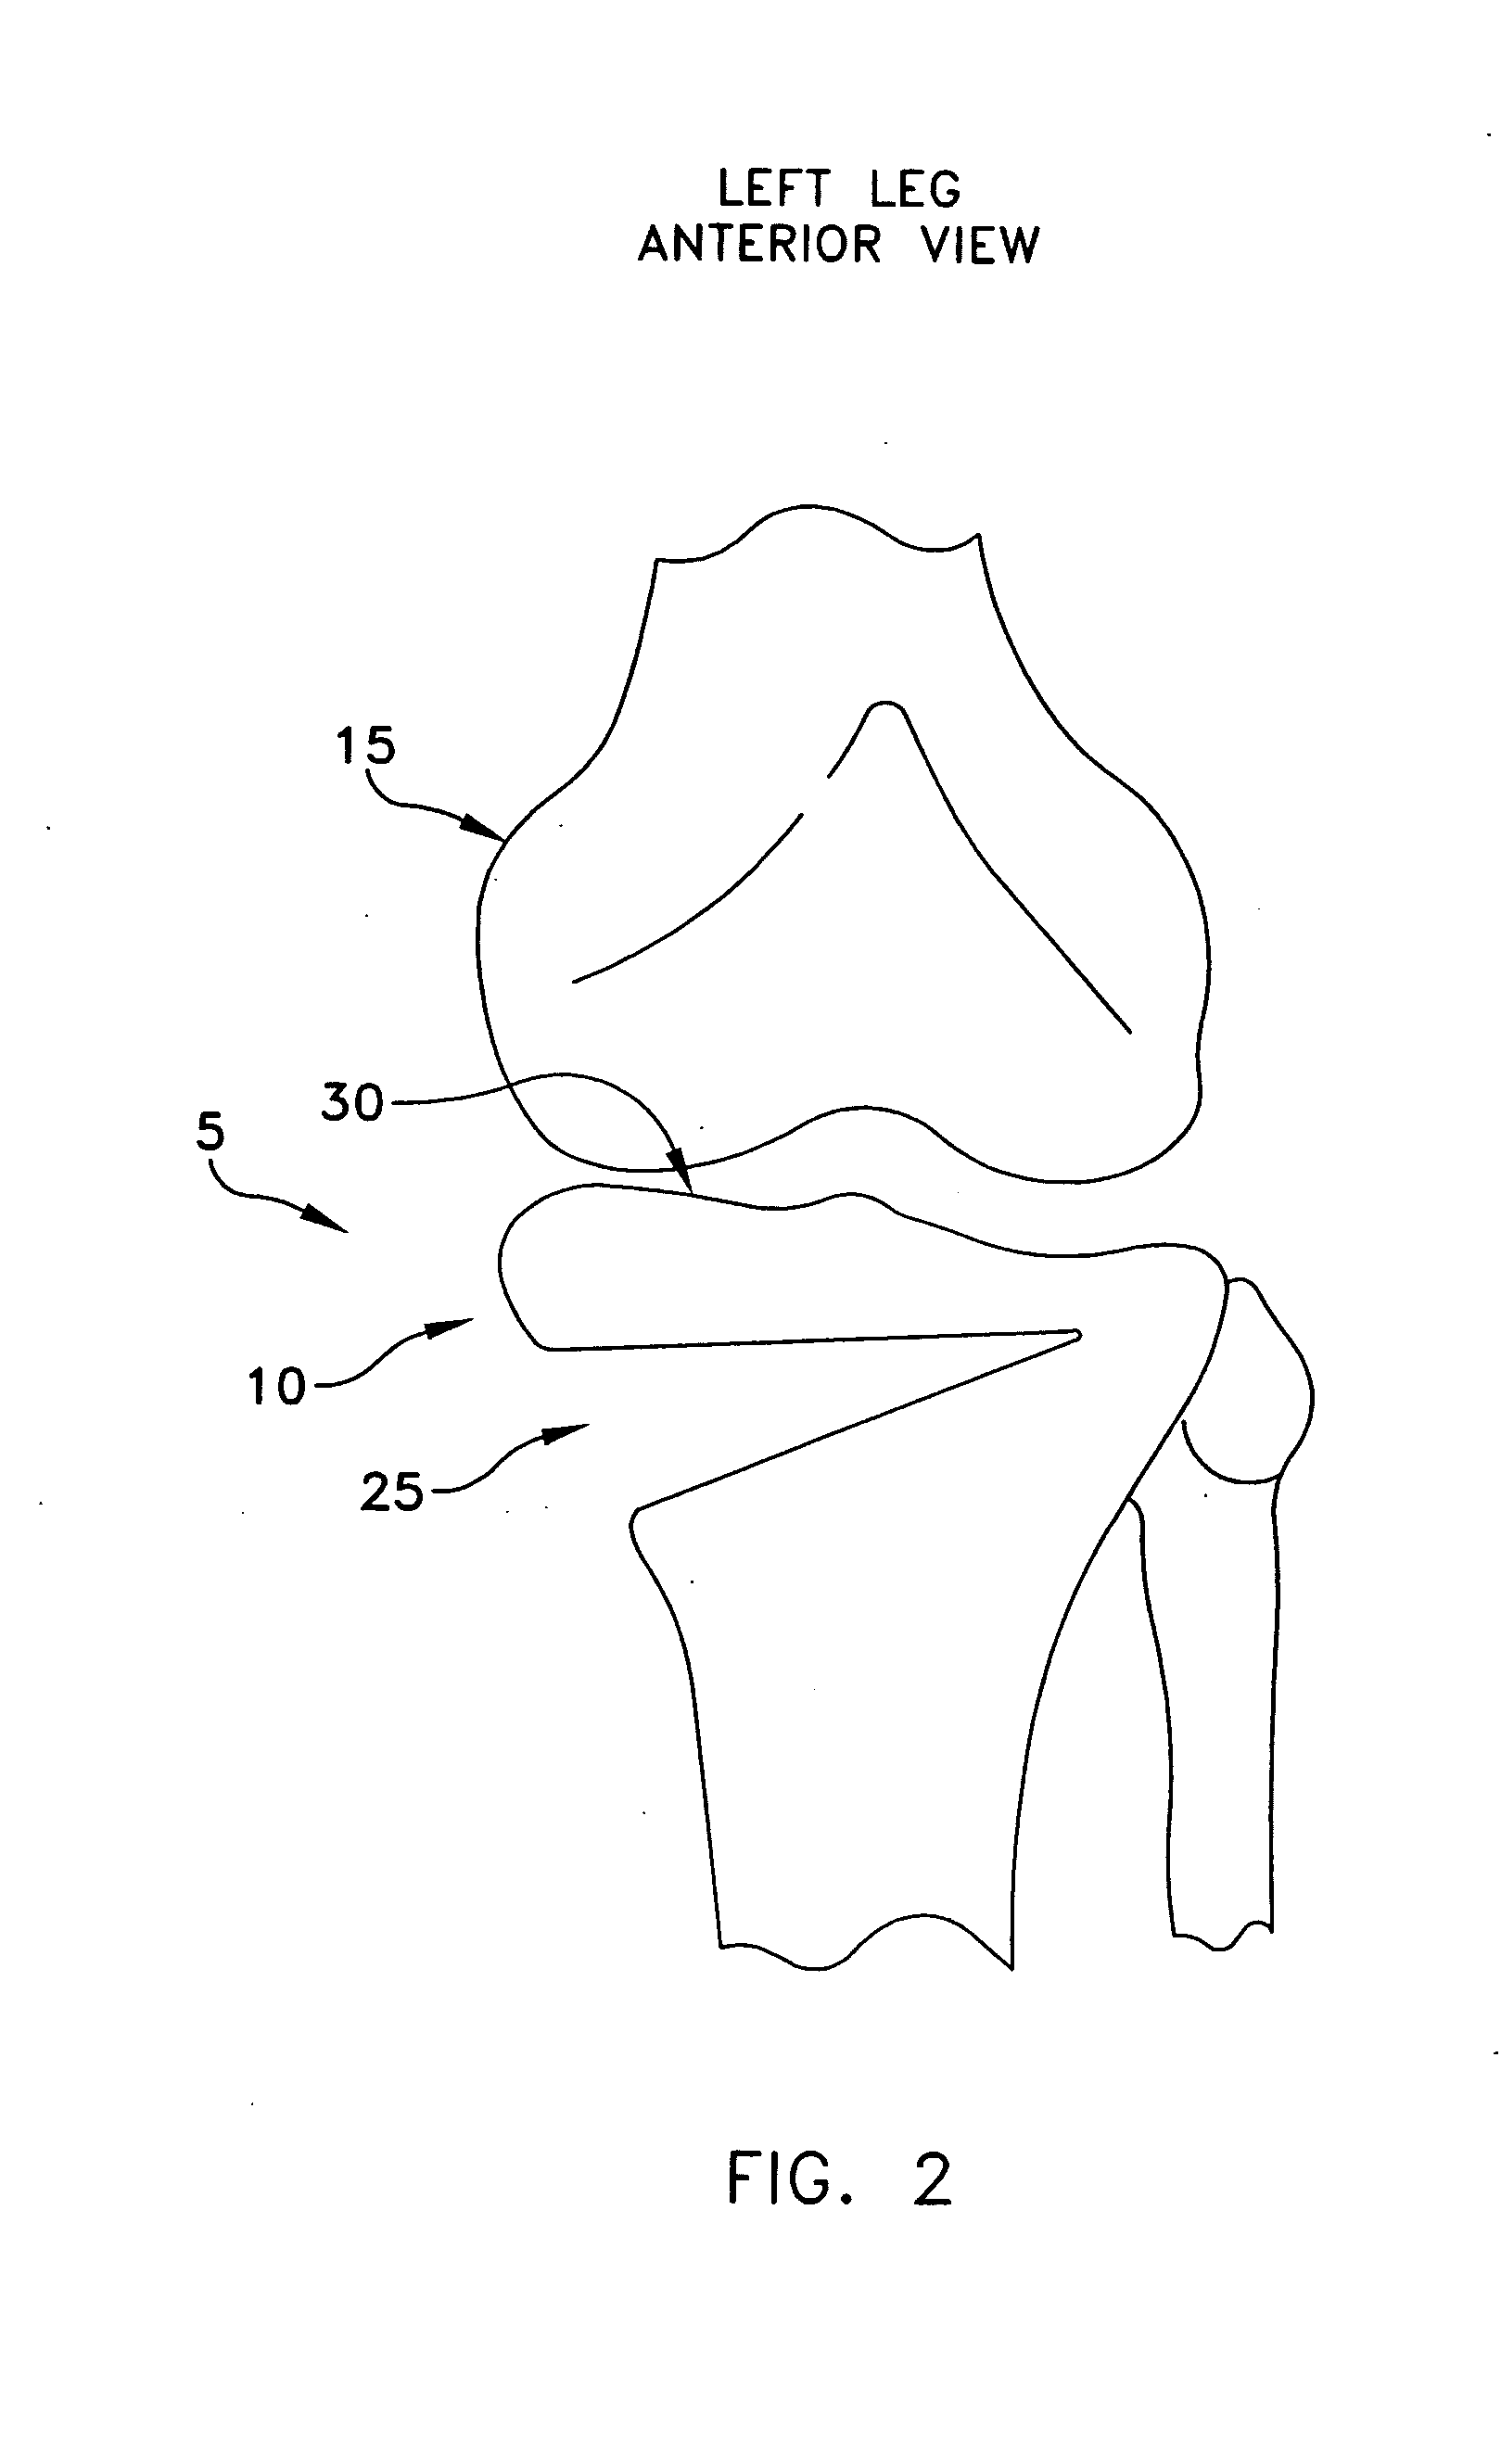 Method and appartus for performing an open, wedge, high tibial osteotomy